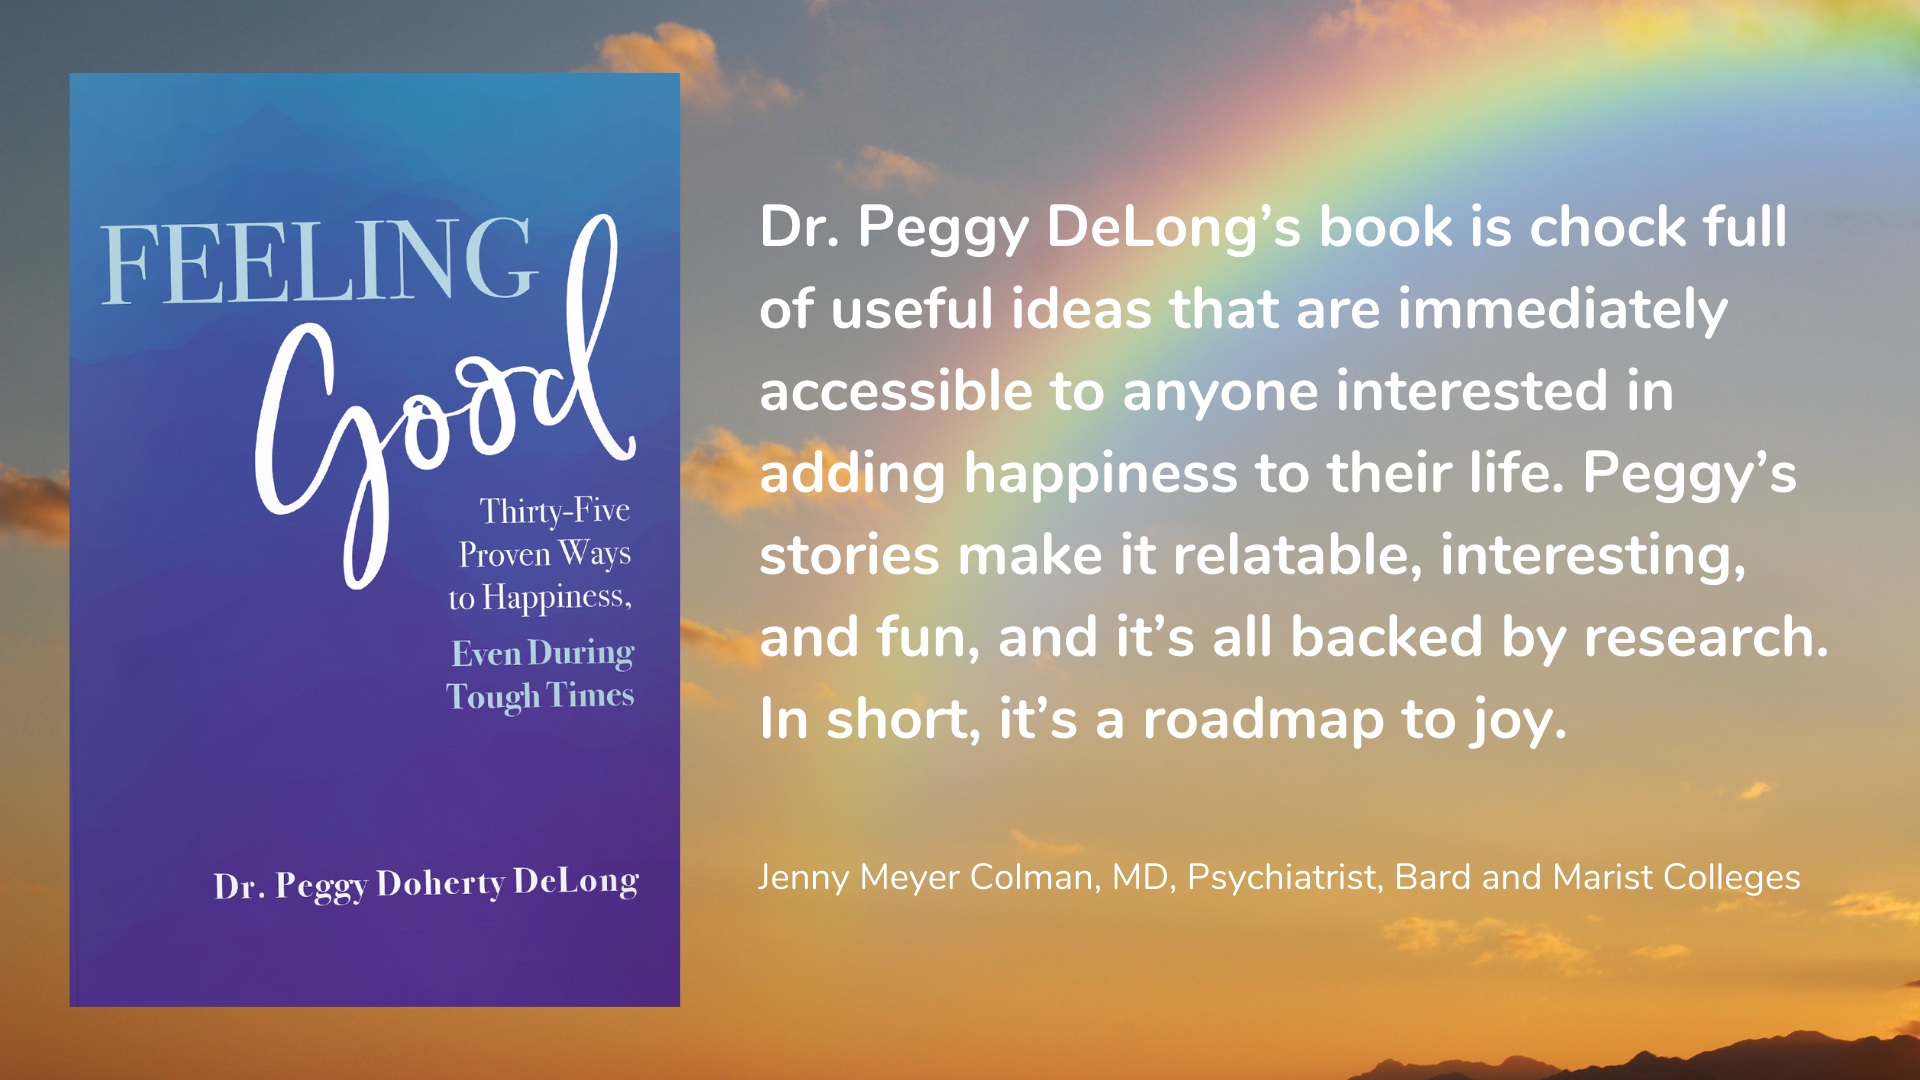 Feeling Good: 35 Proven Ways to Happiness, Even During Tough Times, book cover and description.